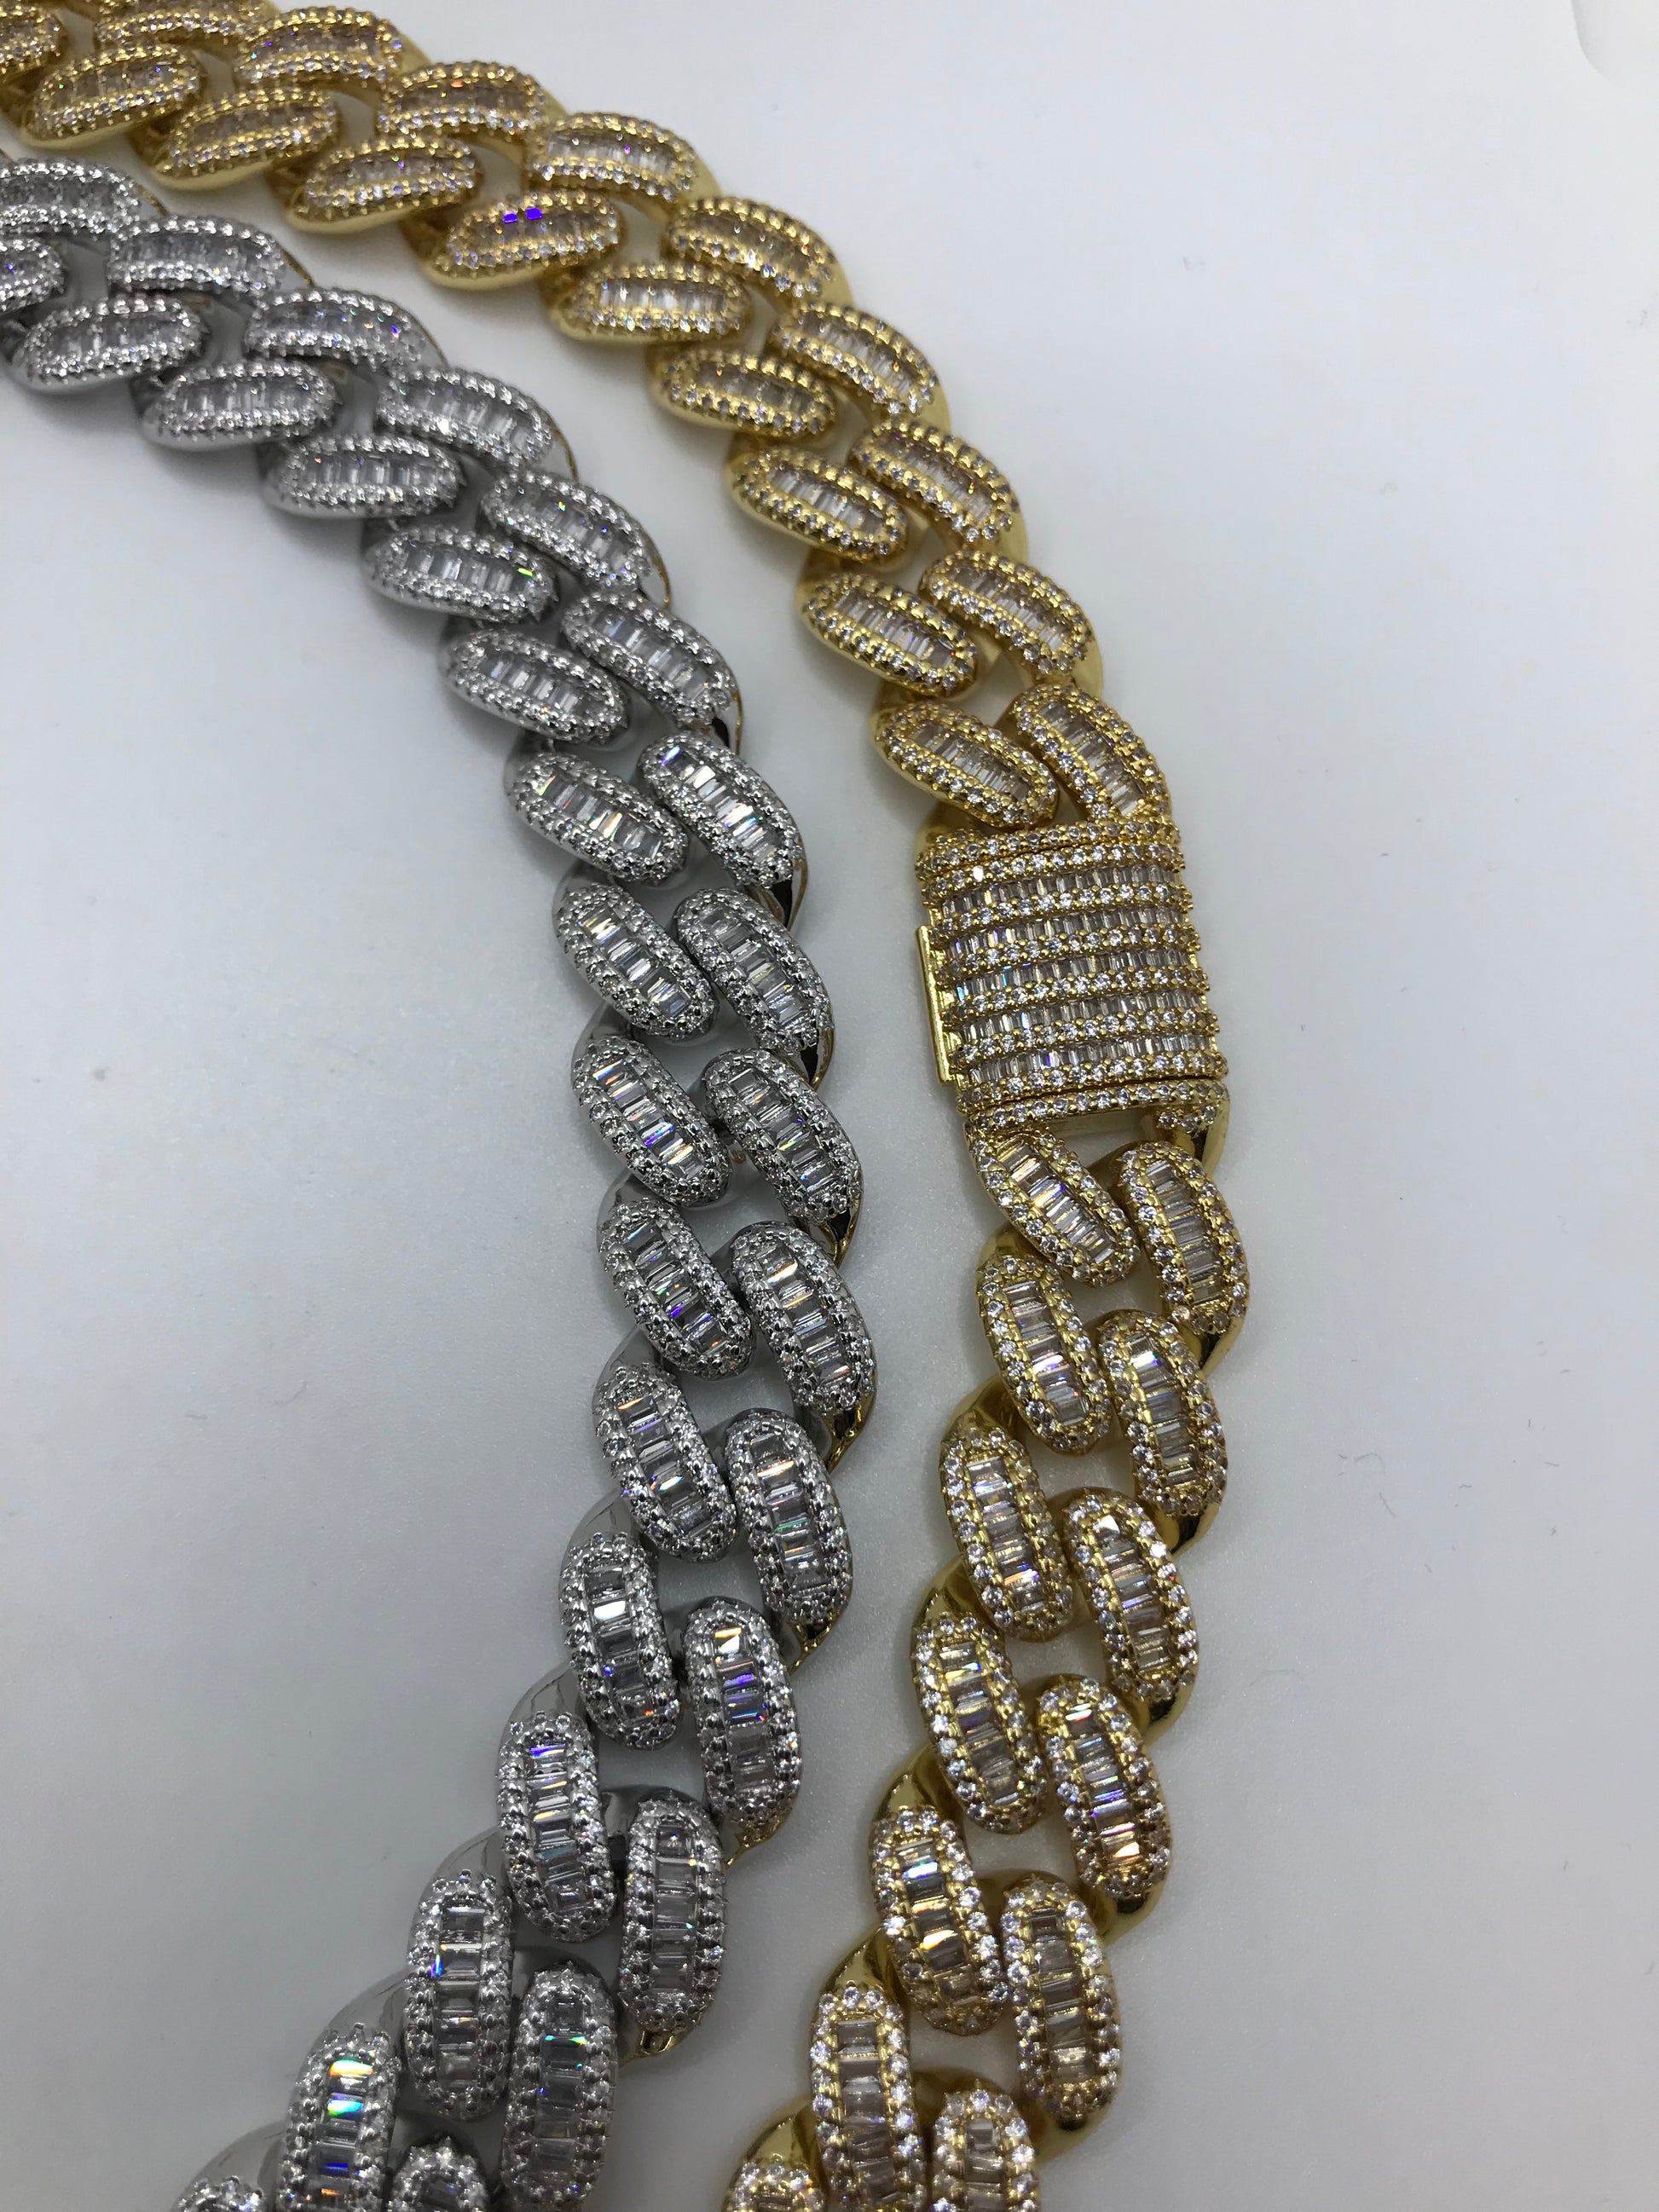 15mm Cuban Link Necklace Chain in Baguette - Yellow Gold 45cm